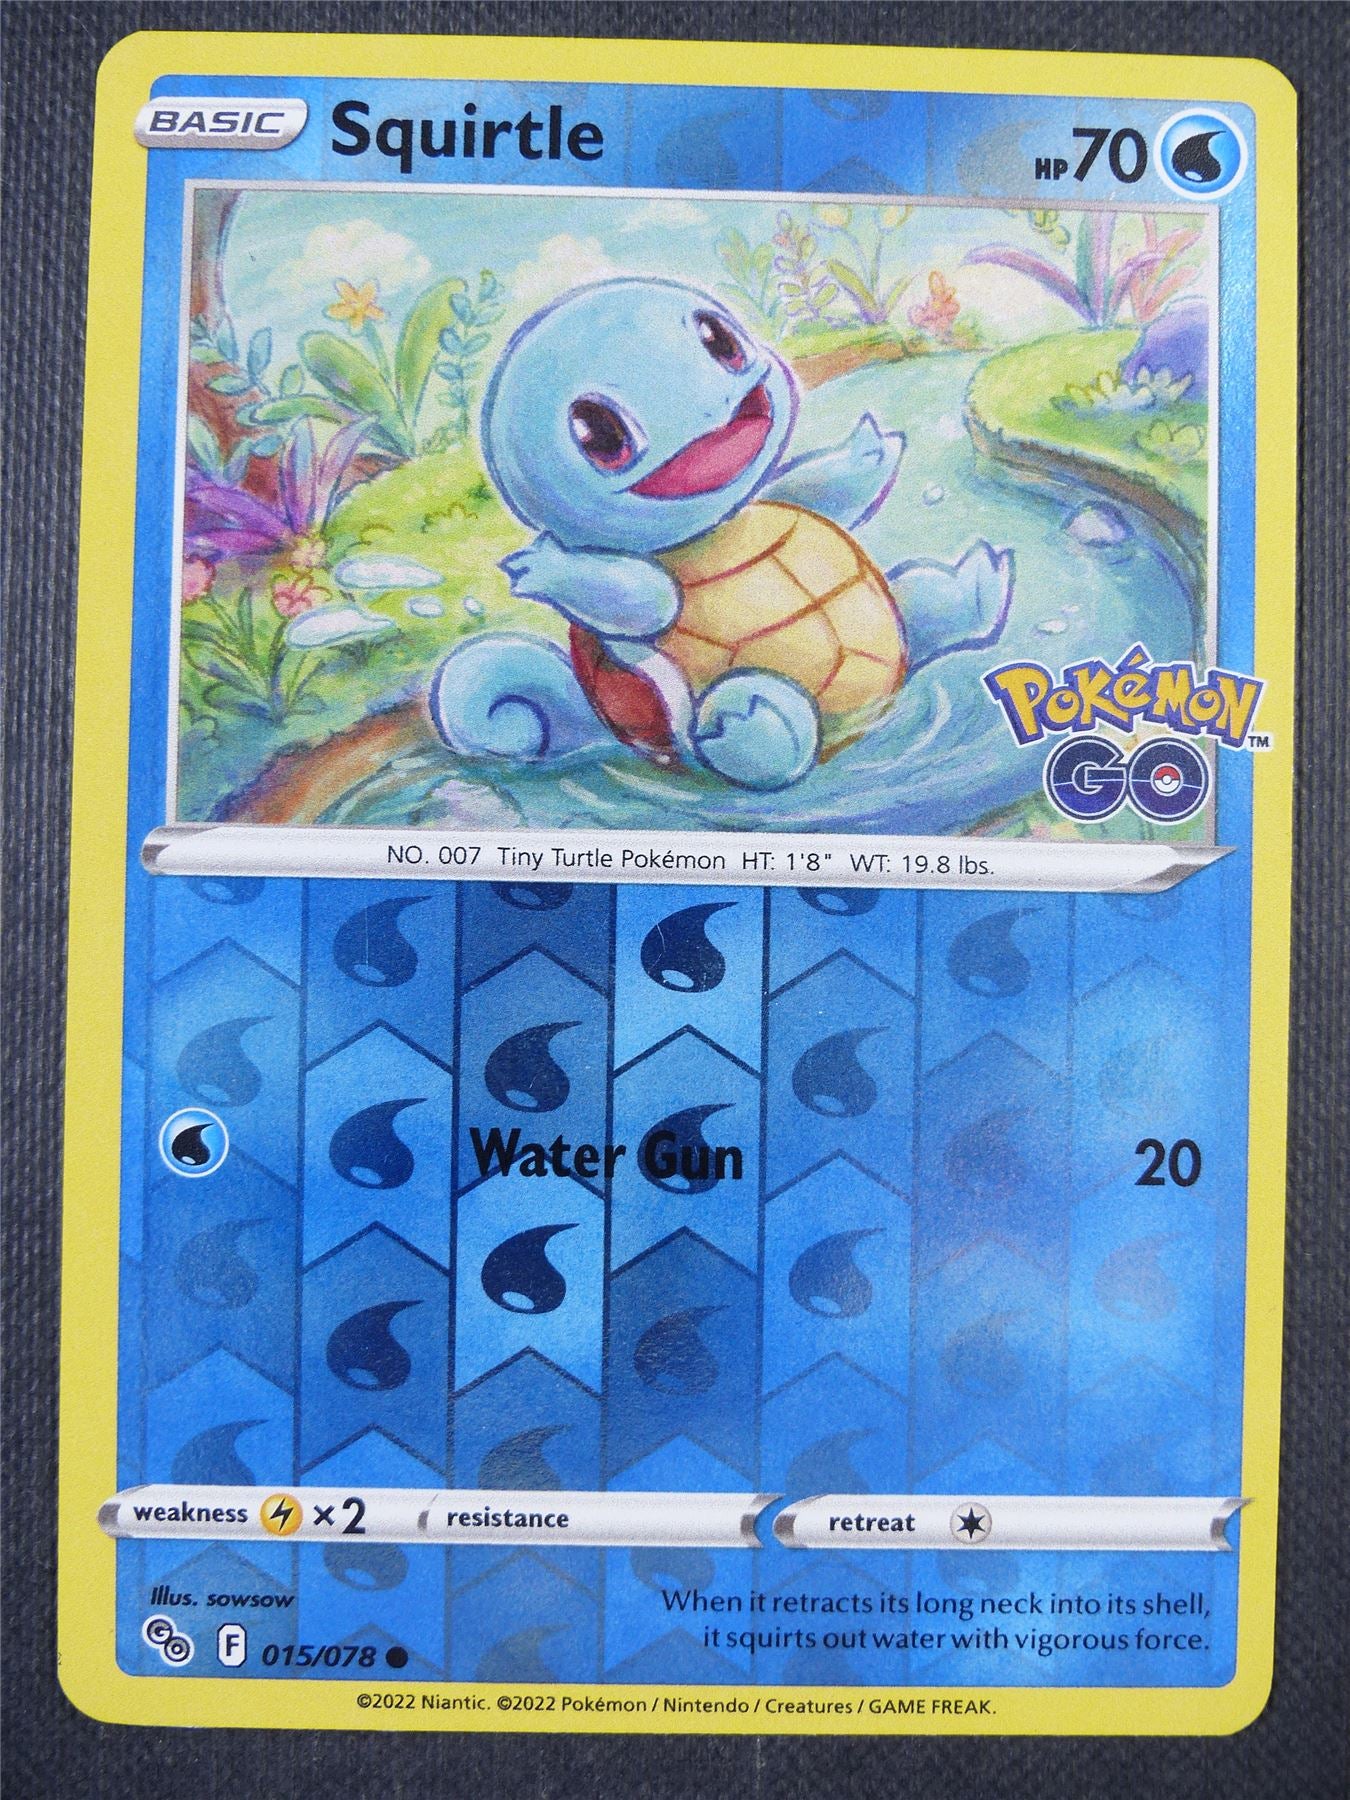 Squirtle 015/078 Reverse Holo - Pokemon Card #7JX